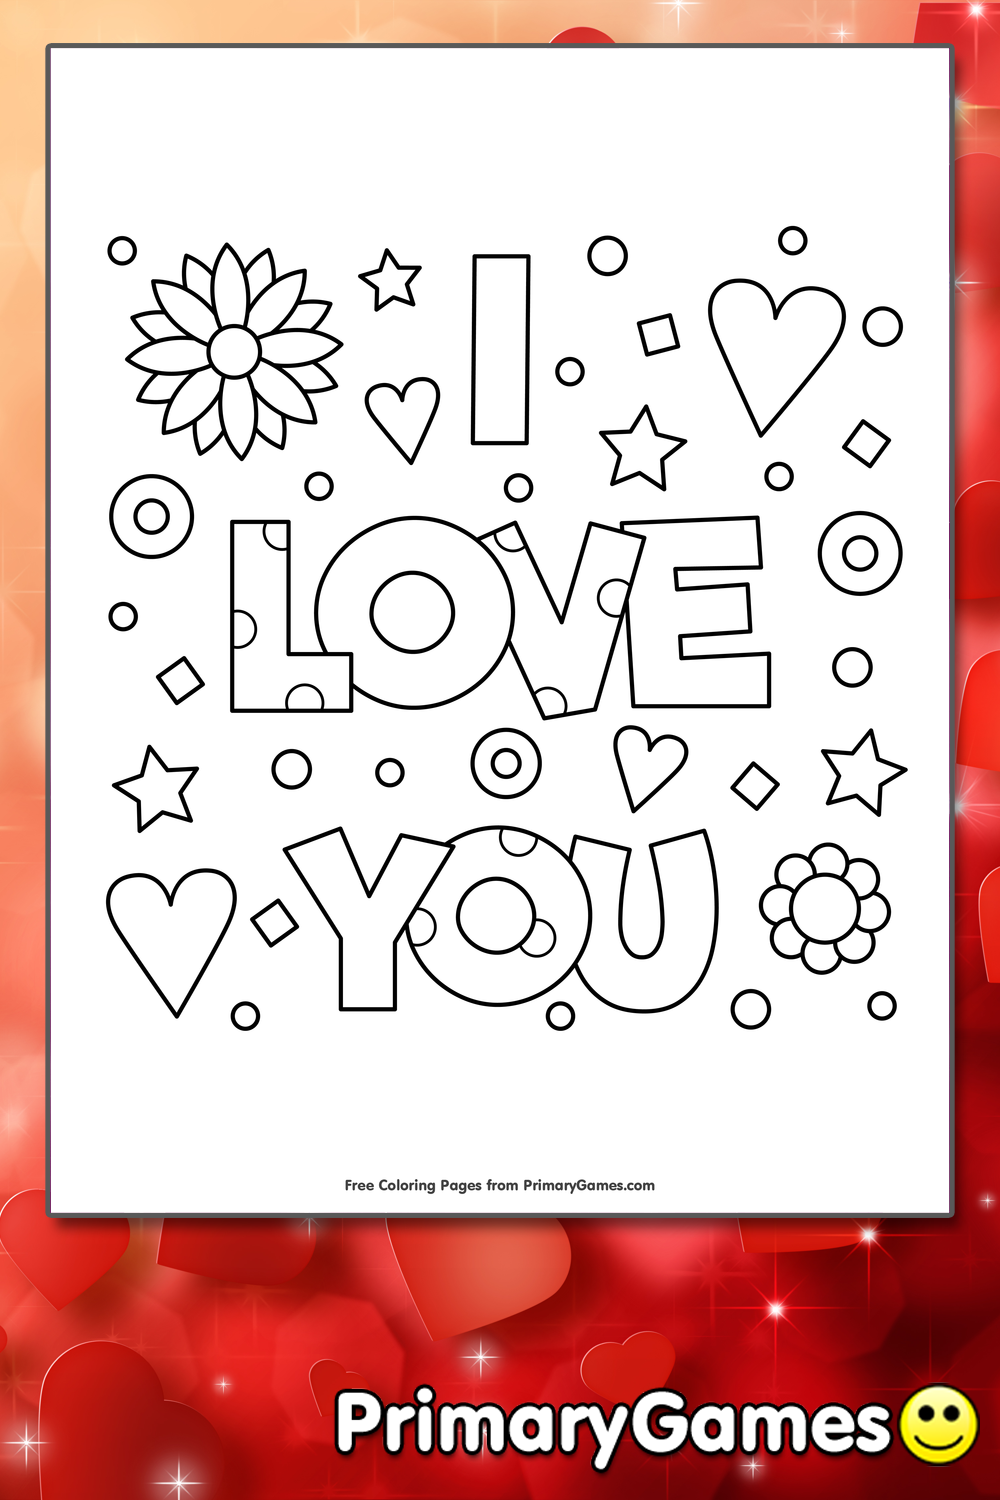 I Love You Coloring Page • FREE Printable PDF from PrimaryGames